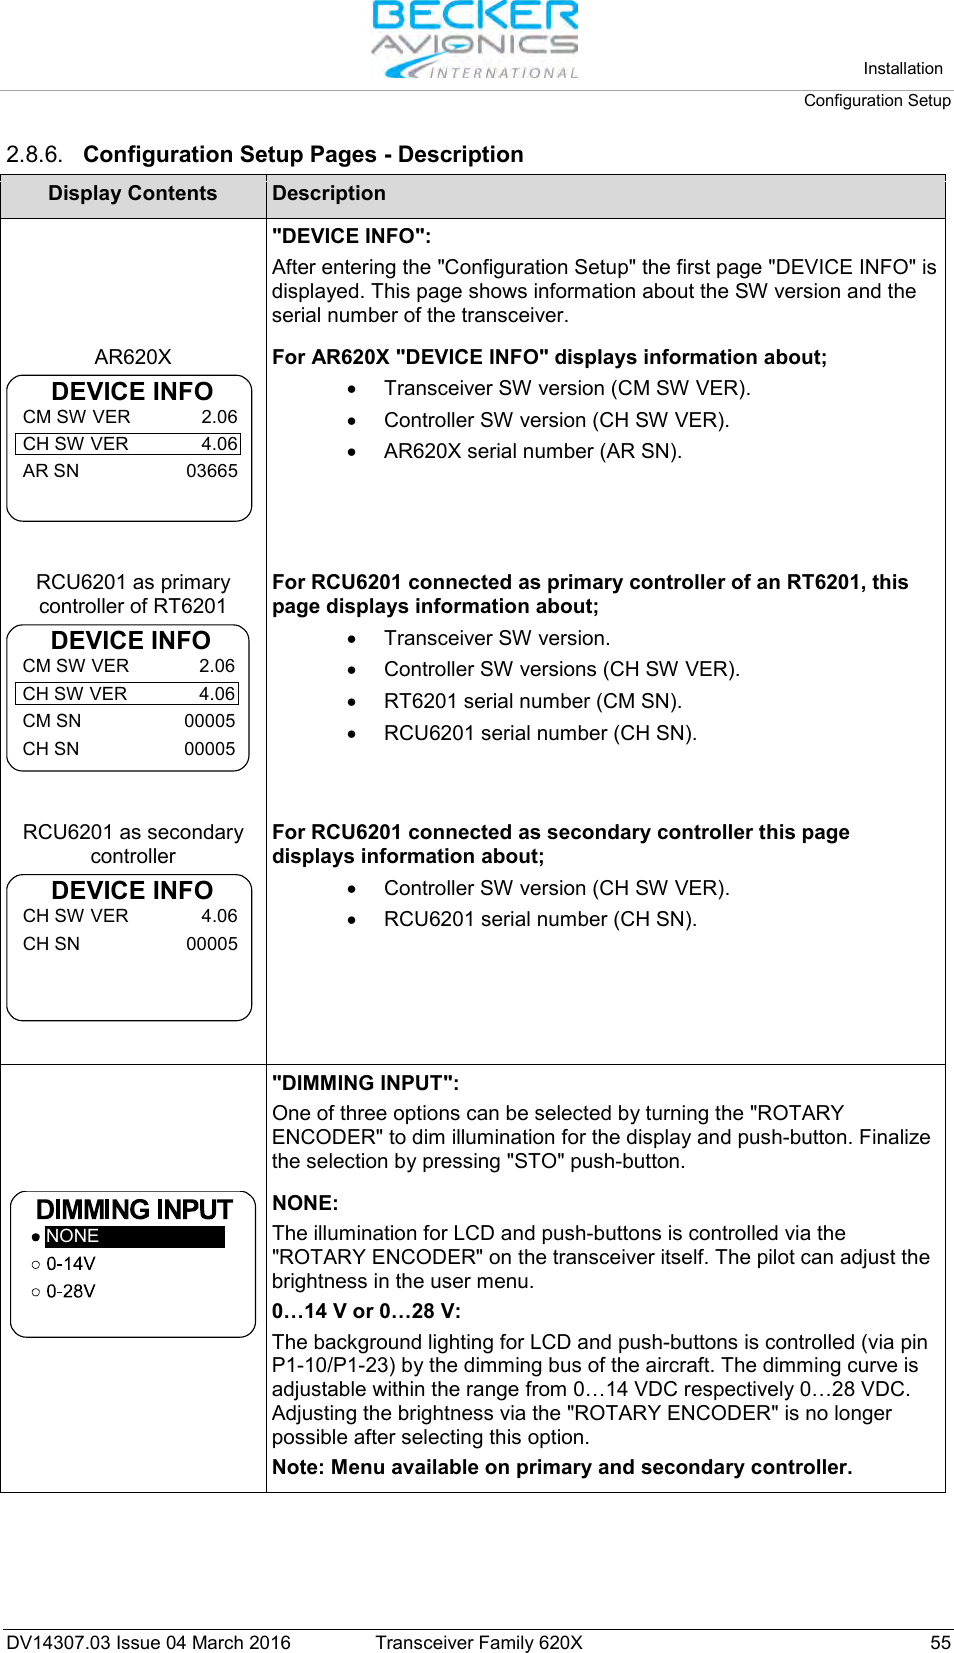   Installation Configuration Setup  DV14307.03 Issue 04 March 2016 Transceiver Family 620X 55 2.8.6. Configuration Setup Pages - Description Display Contents Description  &quot;DEVICE INFO&quot;: After entering the &quot;Configuration Setup&quot; the first page &quot;DEVICE INFO&quot; is displayed. This page shows information about the SW version and the serial number of the transceiver. AR620X  CM SW VER 2.06CH SW VER 4.06AR SN 03665DEVICE INFO  For AR620X &quot;DEVICE INFO&quot; displays information about; • Transceiver SW version (CM SW VER). • Controller SW version (CH SW VER). • AR620X serial number (AR SN). RCU6201 as primary controller of RT6201  CM SW VER 2.06CH SW VER 4.06CM SN 00005CH SN 00005DEVICE INFO  For RCU6201 connected as primary controller of an RT6201, this page displays information about; • Transceiver SW version. • Controller SW versions (CH SW VER). • RT6201 serial number (CM SN). • RCU6201 serial number (CH SN). RCU6201 as secondary controller  CH SW VER 4.06CH SN 00005DEVICE INFO  For RCU6201 connected as secondary controller this page displays information about; • Controller SW version (CH SW VER). • RCU6201 serial number (CH SN).  &quot;DIMMING INPUT&quot;: One of three options can be selected by turning the &quot;ROTARY ENCODER&quot; to dim illumination for the display and push-button. Finalize the selection by pressing &quot;STO&quot; push-button. NONE NONE: The illumination for LCD and push-buttons is controlled via the &quot;ROTARY ENCODER&quot; on the transceiver itself. The pilot can adjust the brightness in the user menu.  0…14 V or 0…28 V: The background lighting for LCD and push-buttons is controlled (via pin P1-10/P1-23) by the dimming bus of the aircraft. The dimming curve is adjustable within the range from 0…14 VDC respectively 0…28 VDC. Adjusting the brightness via the &quot;ROTARY ENCODER&quot; is no longer possible after selecting this option.  Note: Menu available on primary and secondary controller. 